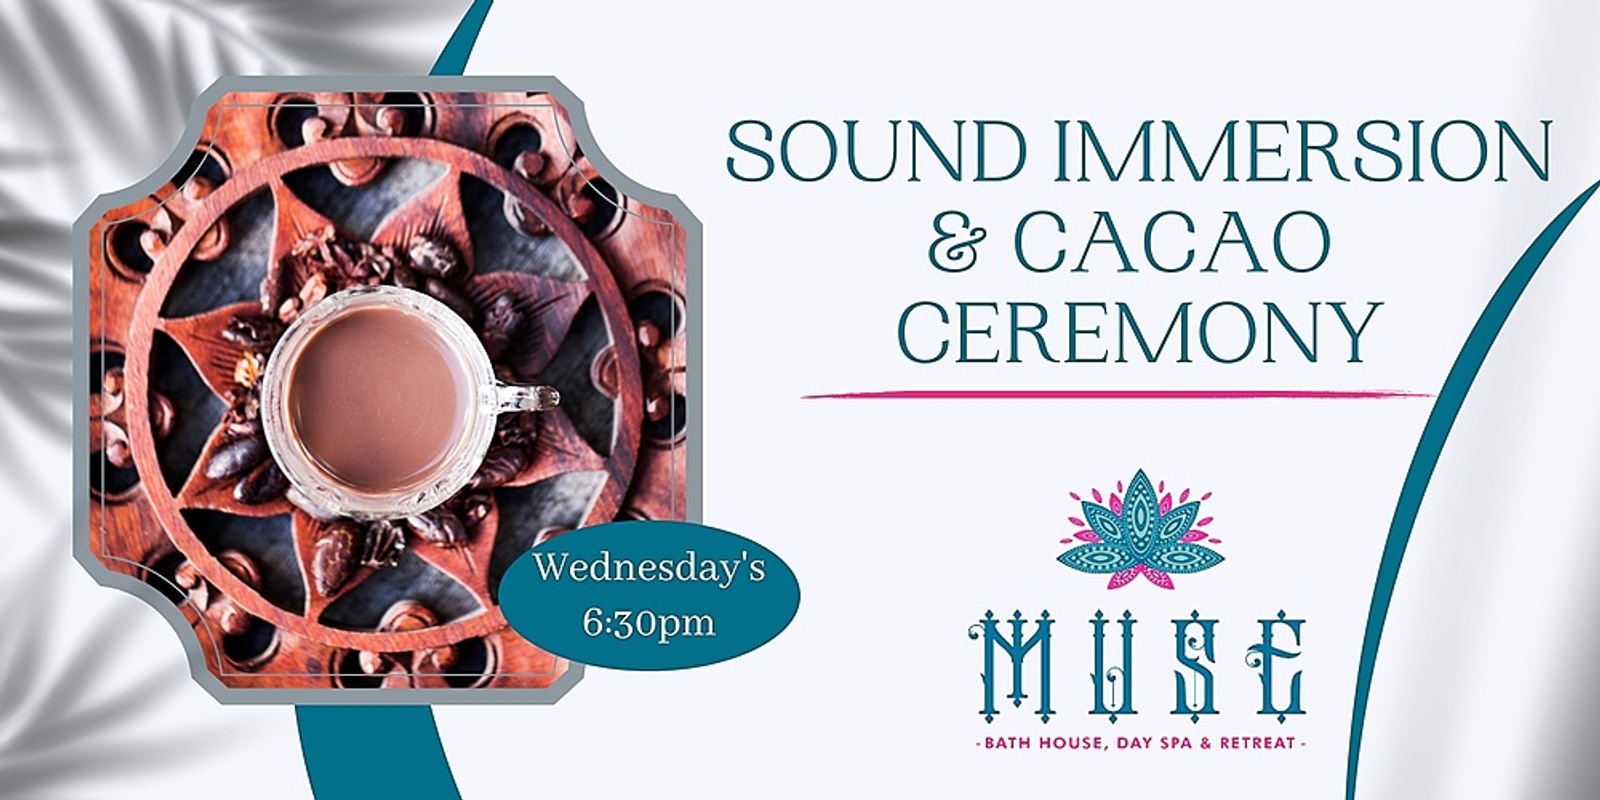 Sound Immersion & Cacao Ceremony 